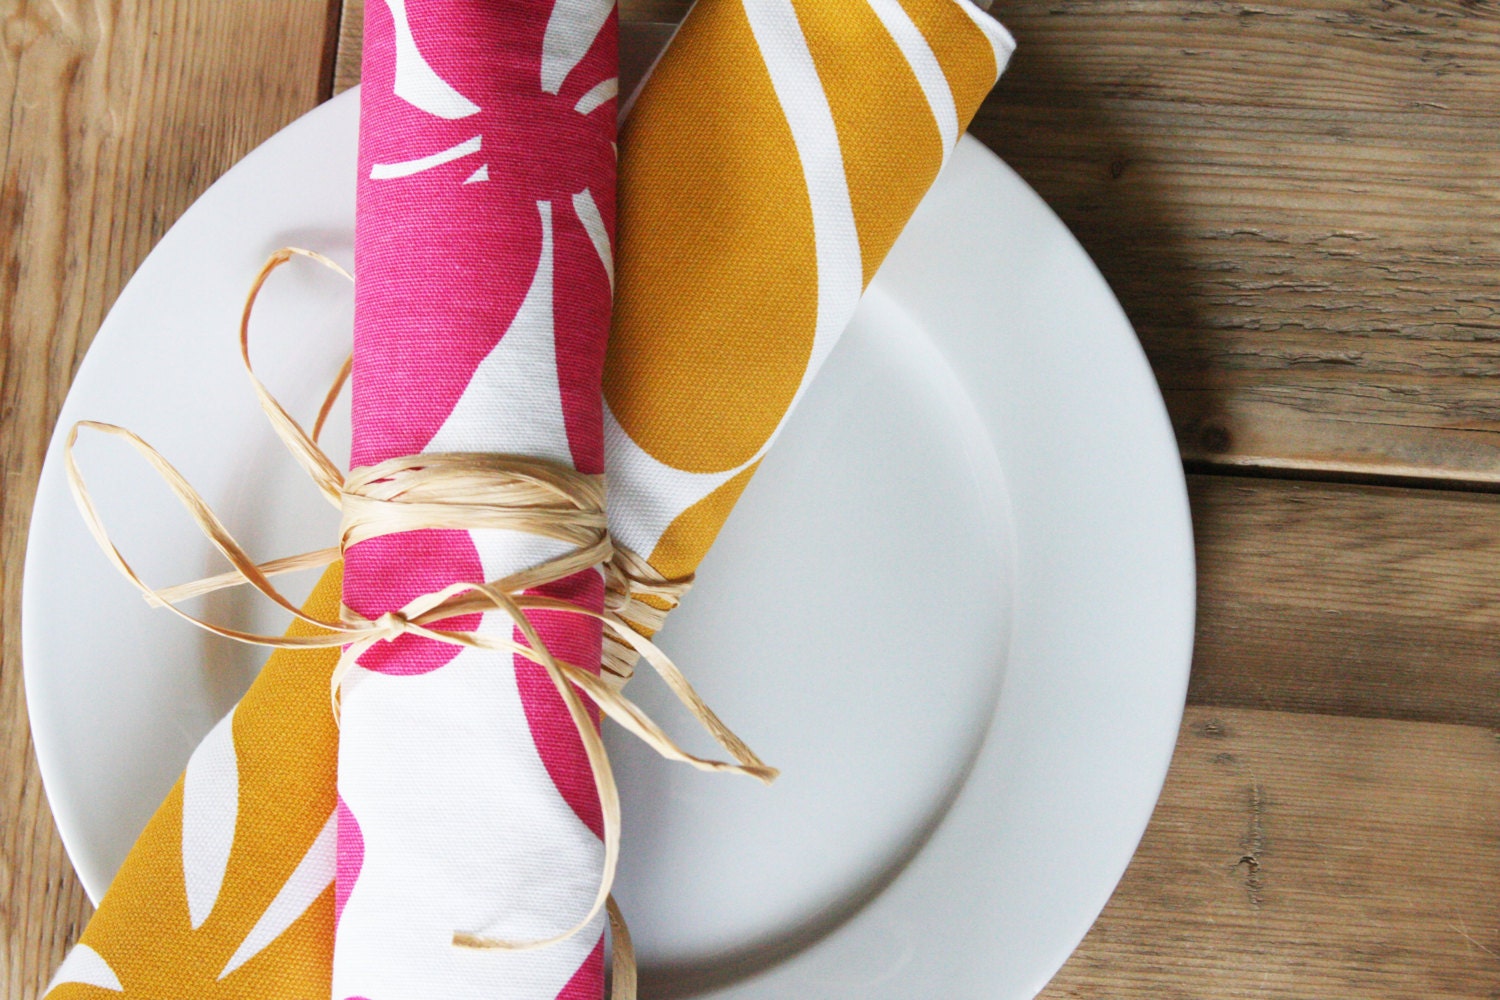 Reversible Placemats - Summer Entertaining with Floral Pink and Yellow Orange - Set of 2 - FREE US SHIPPING - toocutecustomcrafts